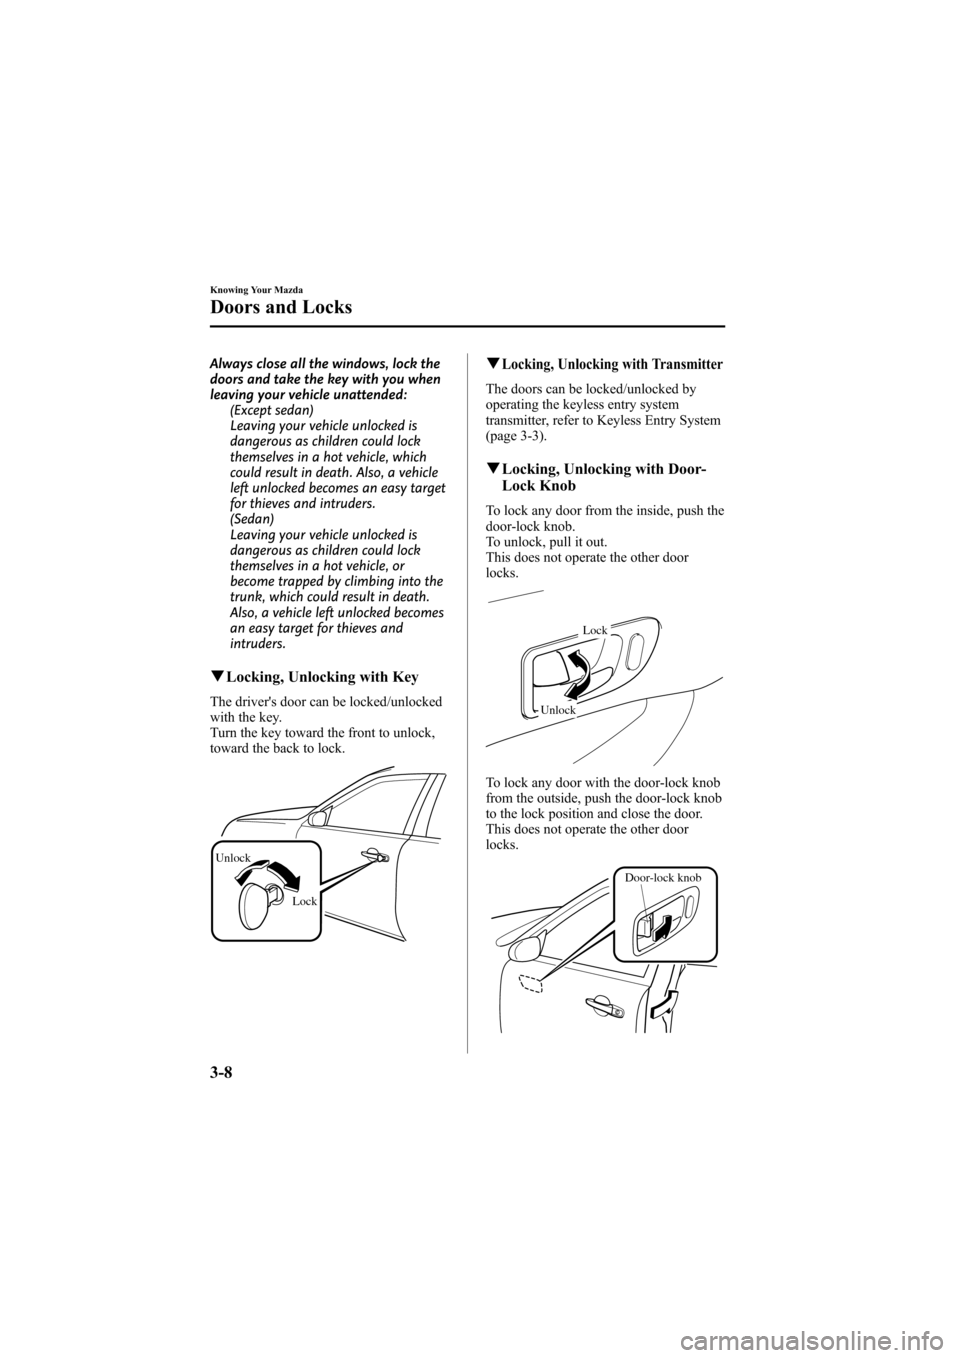 MAZDA MODEL 6 2008  Owners Manual (in English) Black plate (84,1)
Always close all the windows, lock the
doors and take the key with you when
leaving your vehicle unattended:(Except sedan)
Leaving your vehicle unlocked is
dangerous as children cou